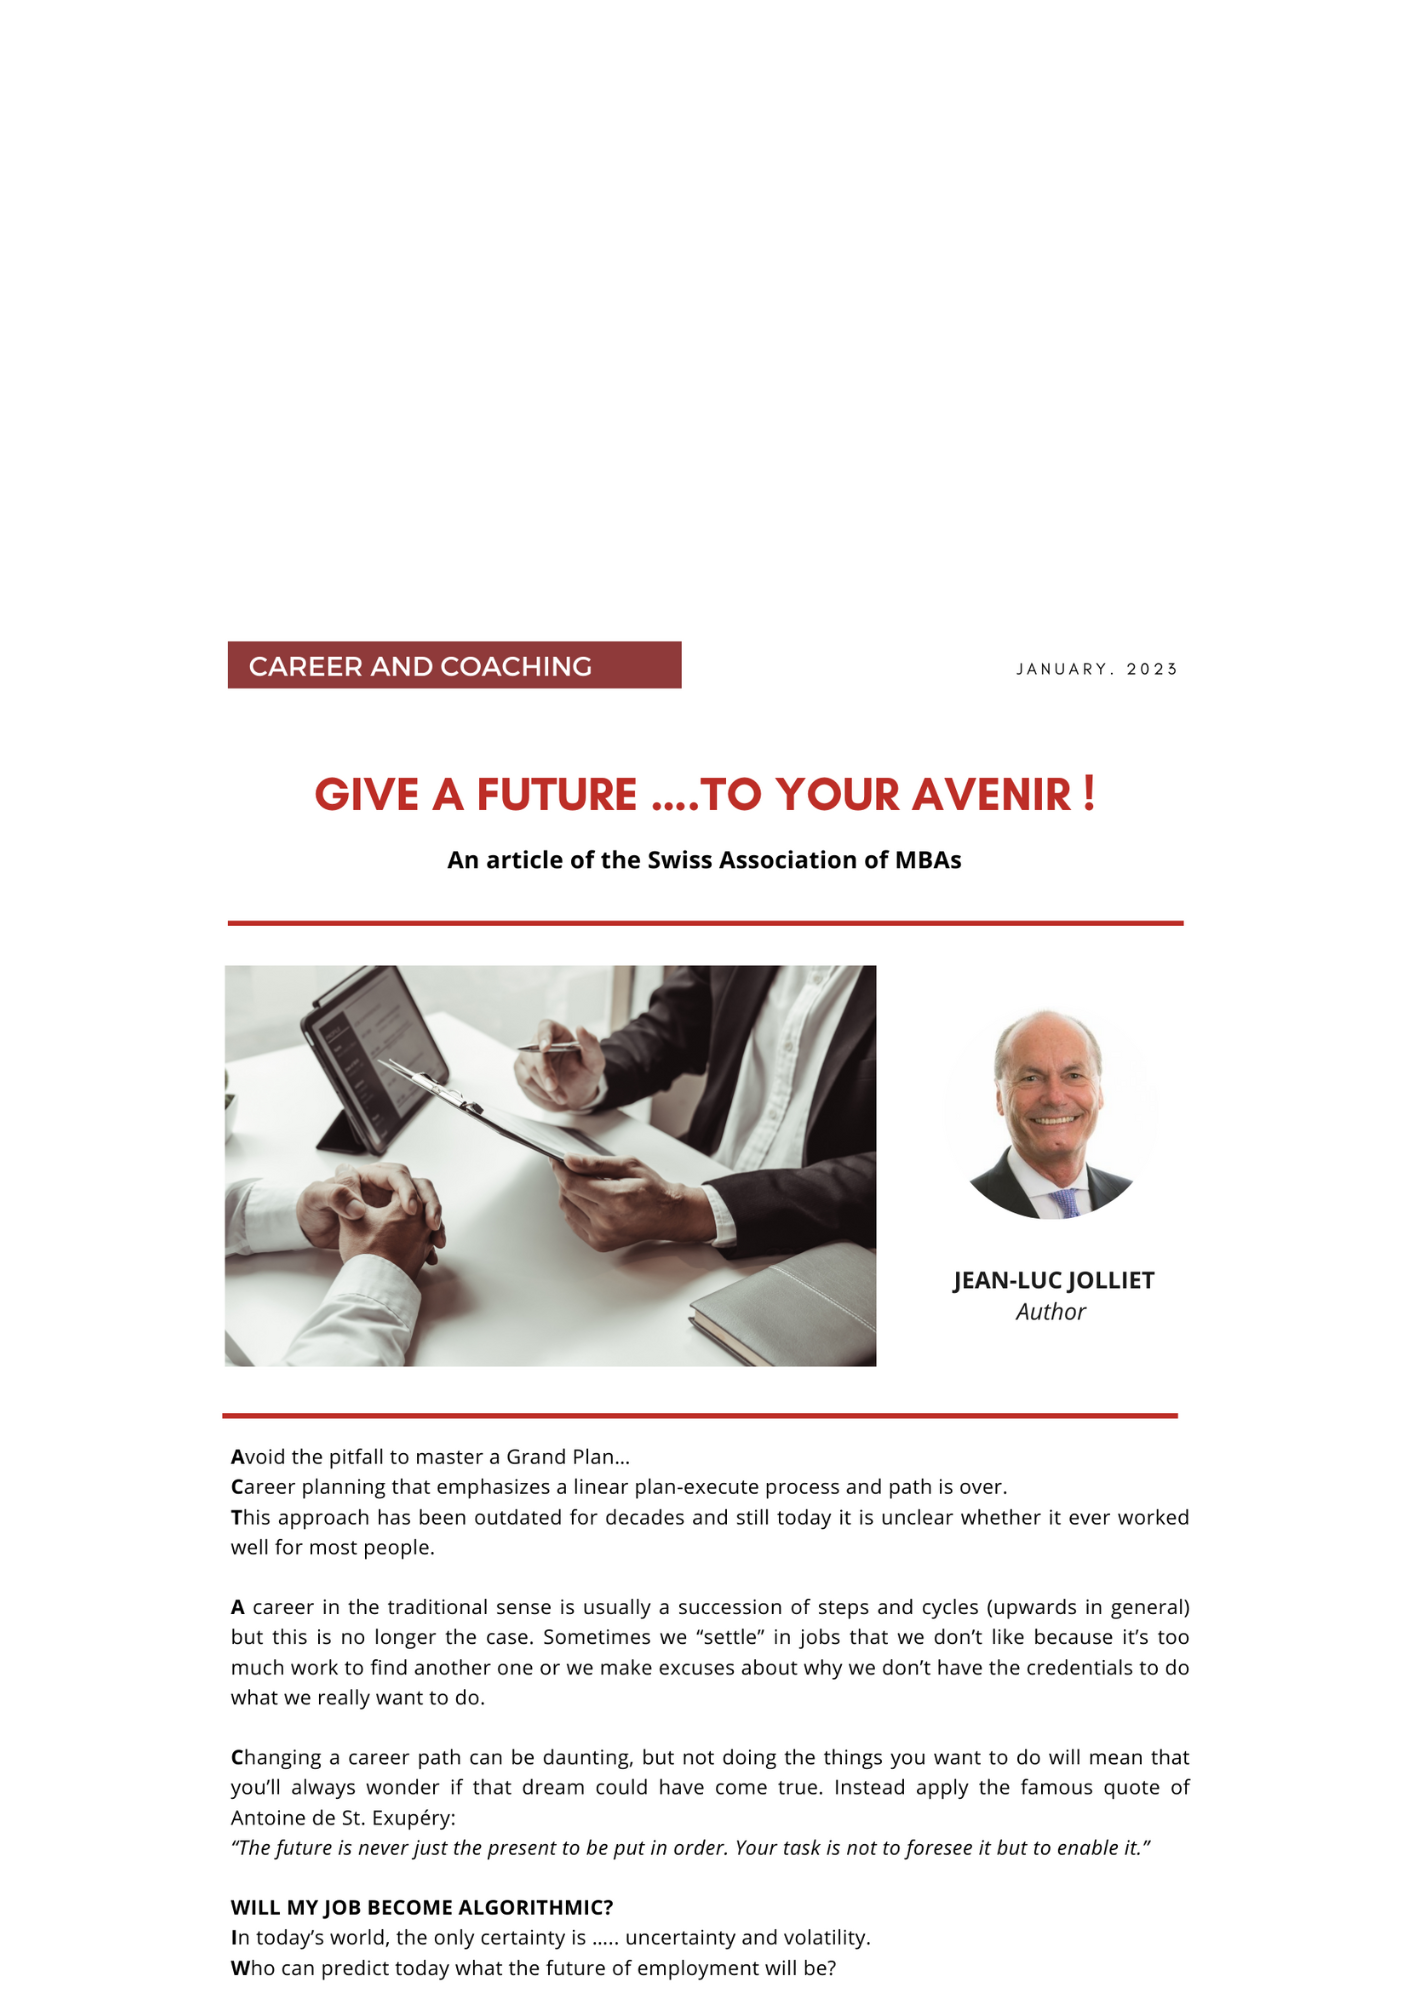 GIVE A FUTURE ….TO YOUR AVENIR !